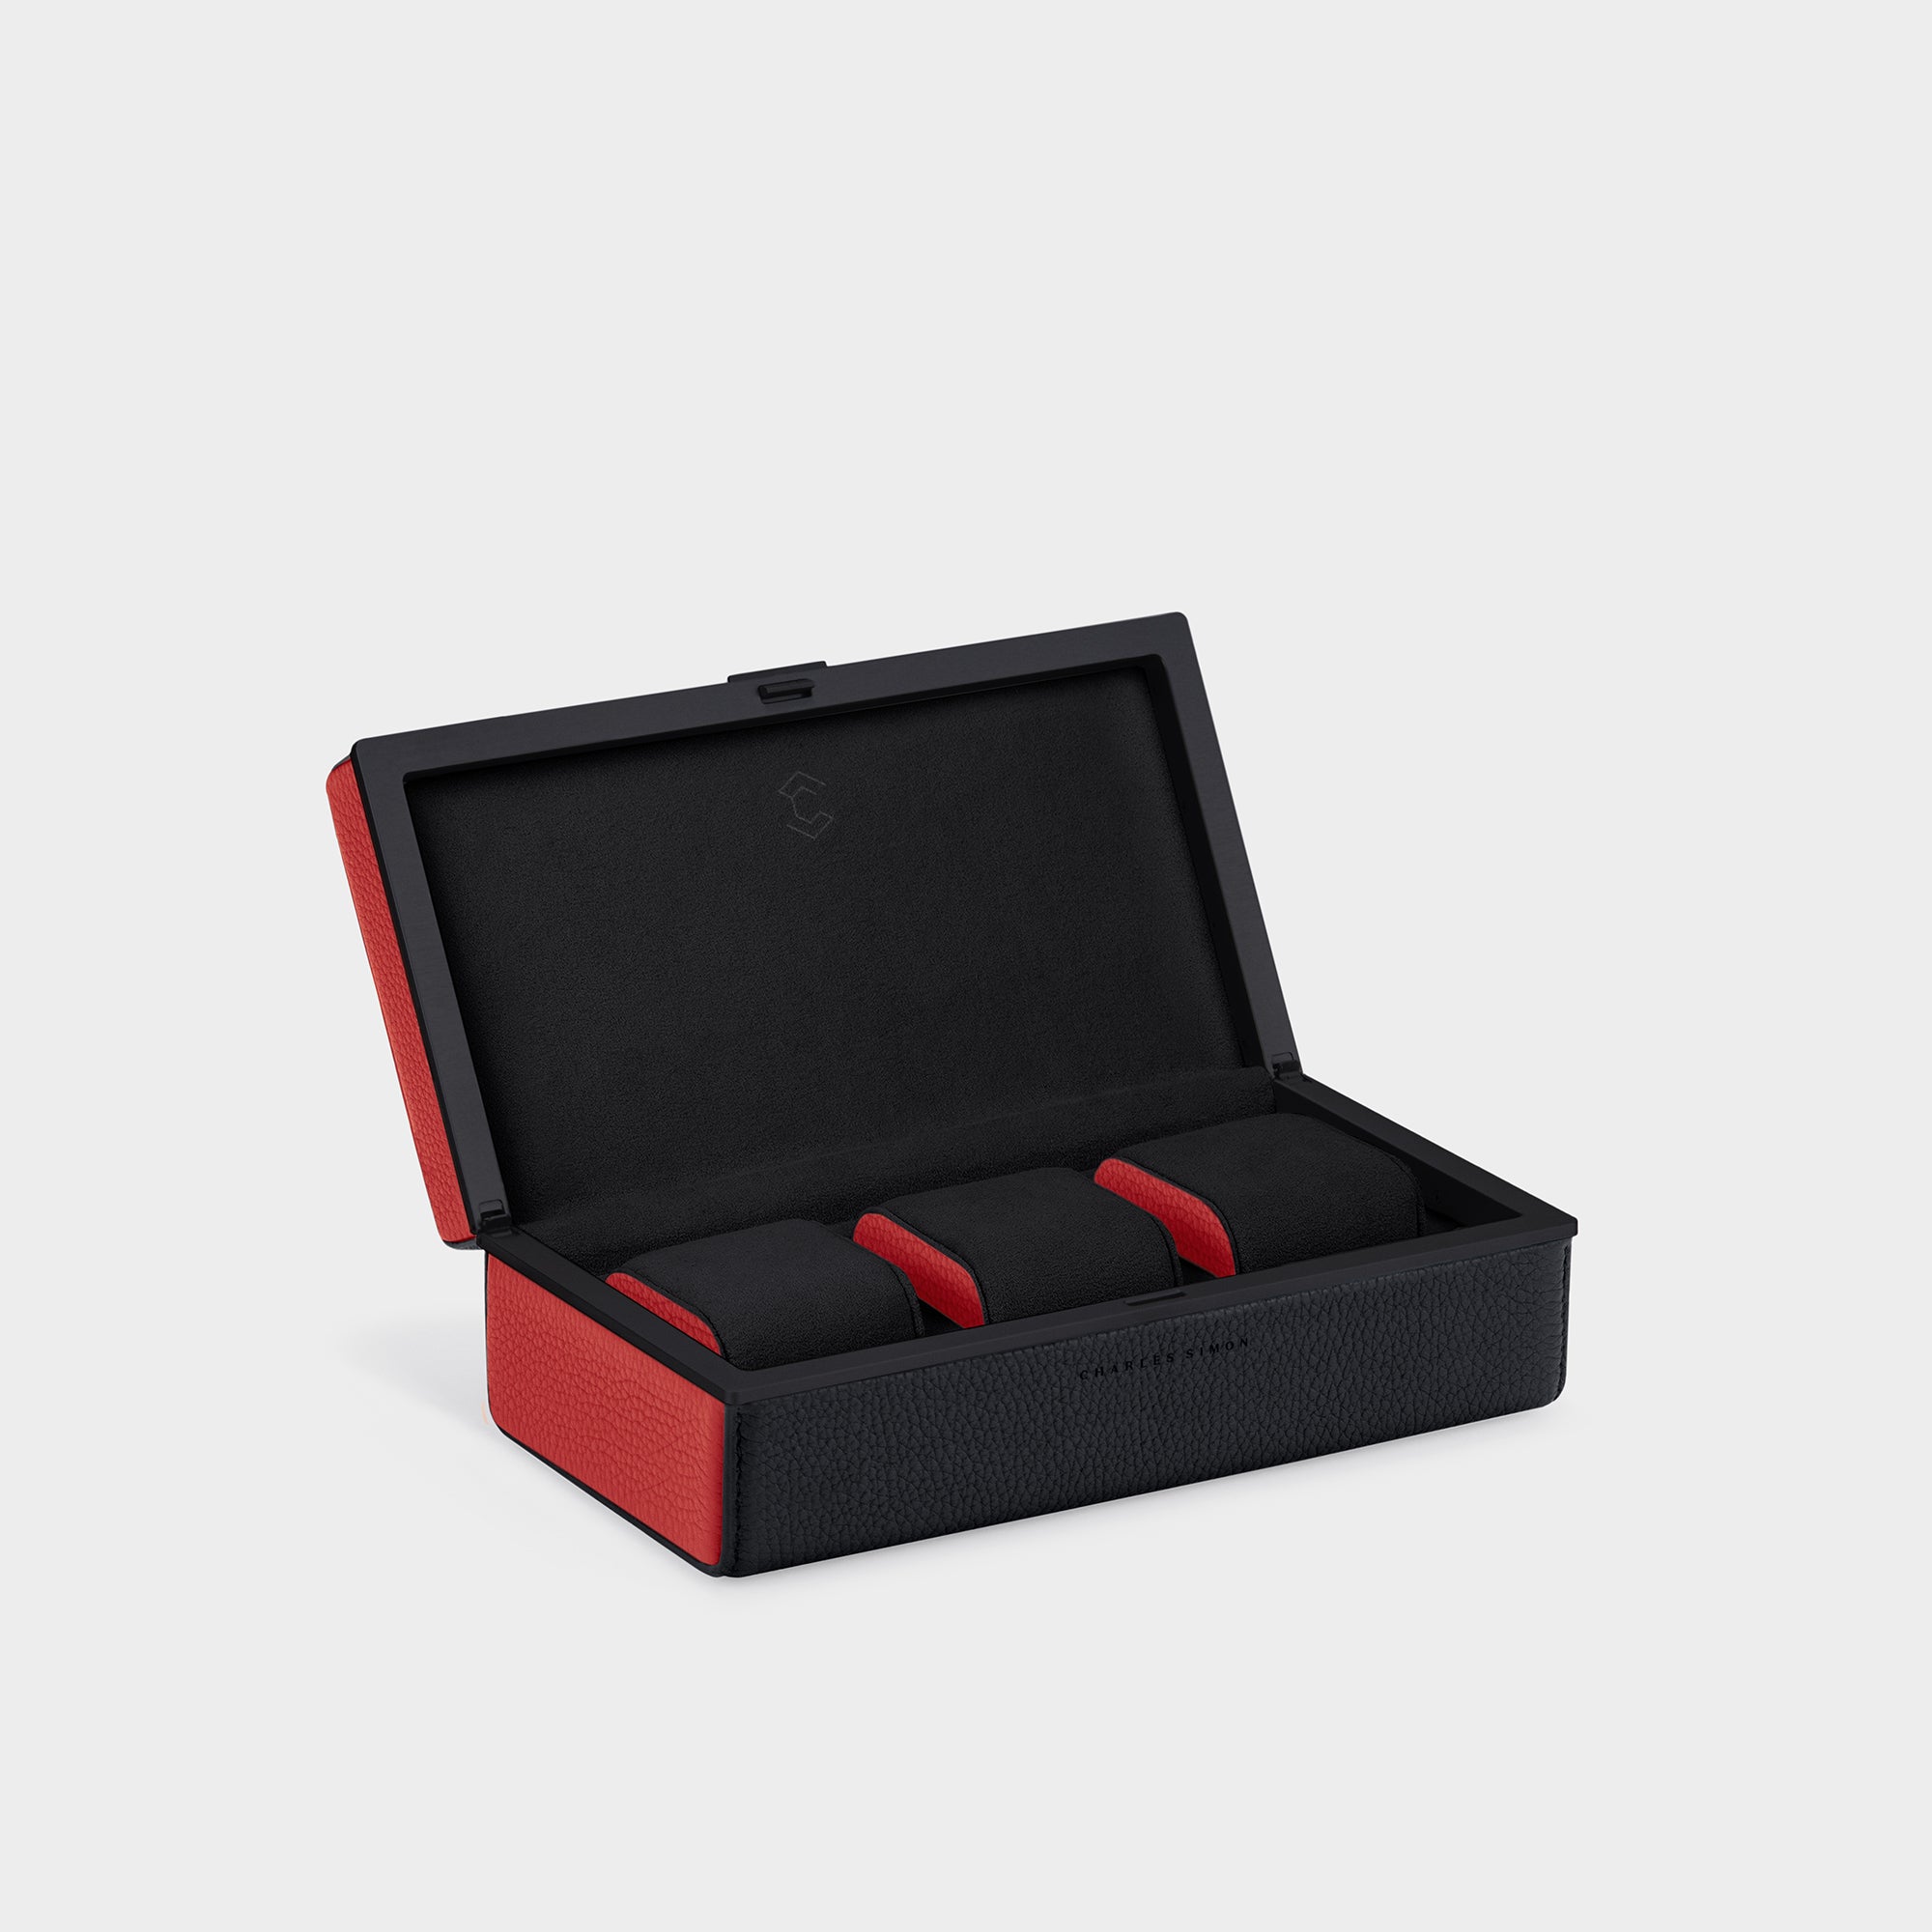 Bold handmade designer watch case for up to 3 watches.  Open Eaton 3 by Charles Simon featuring black leather with red leather accents, black anodized aluminum and black Alcantara with contrasting red leather accents on the cushion sides 